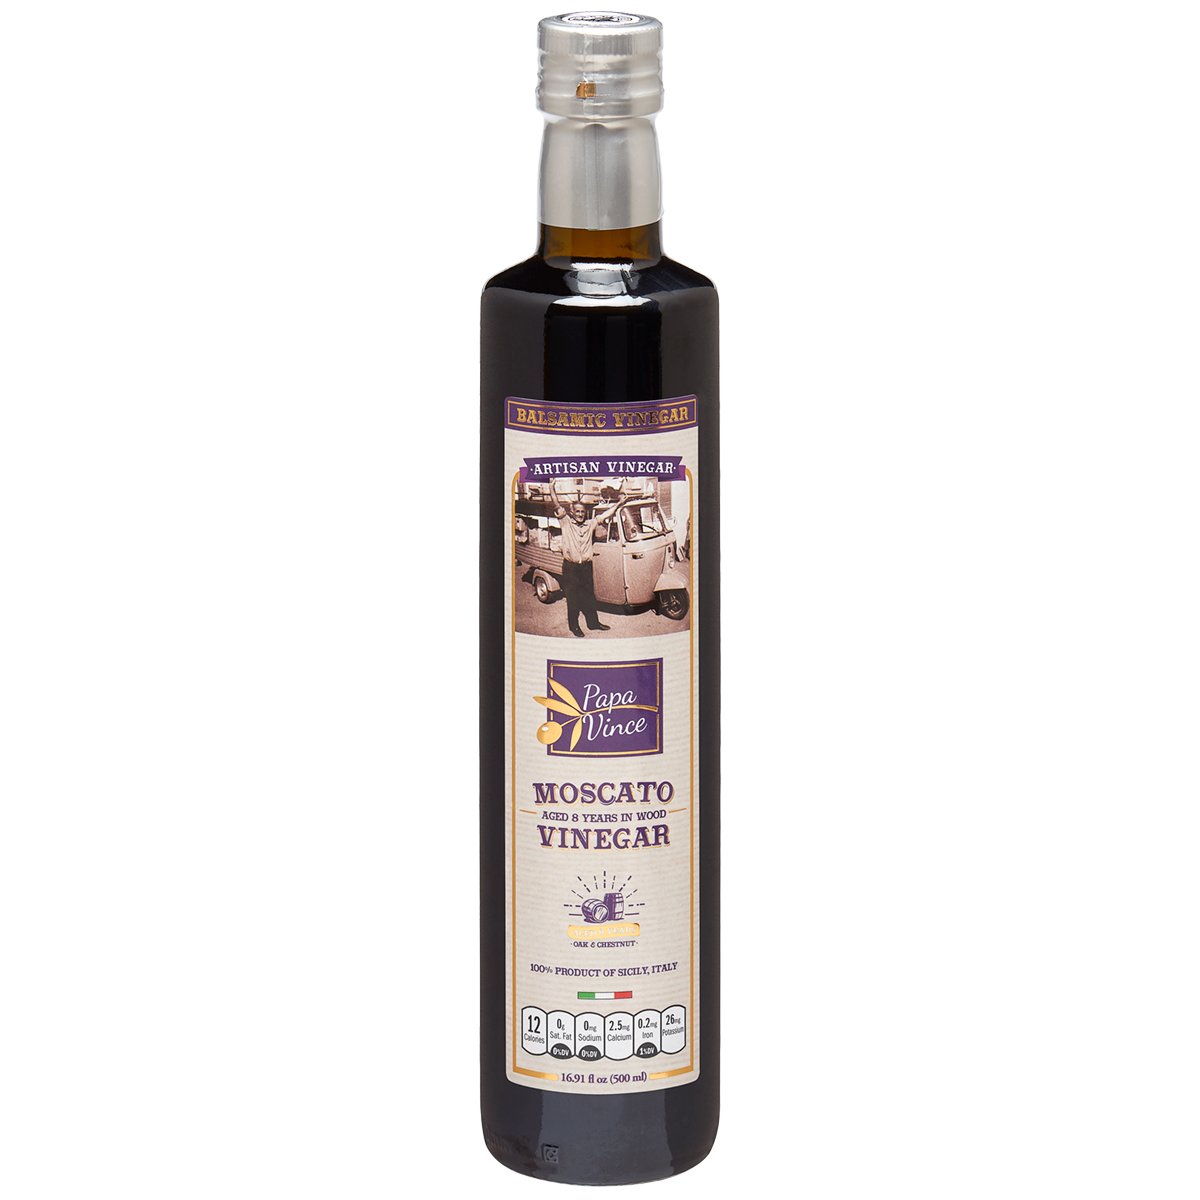 Balsamic Vinegar Red Wine Moscato - Clean Food, with hints of Figs, Raspberry & Homemade Wine aged 8-years in Oak & Chestnut wood in small batches by our family from Sicily, Italy | 16.91 fl oz - Papa Vince - Papa Vince